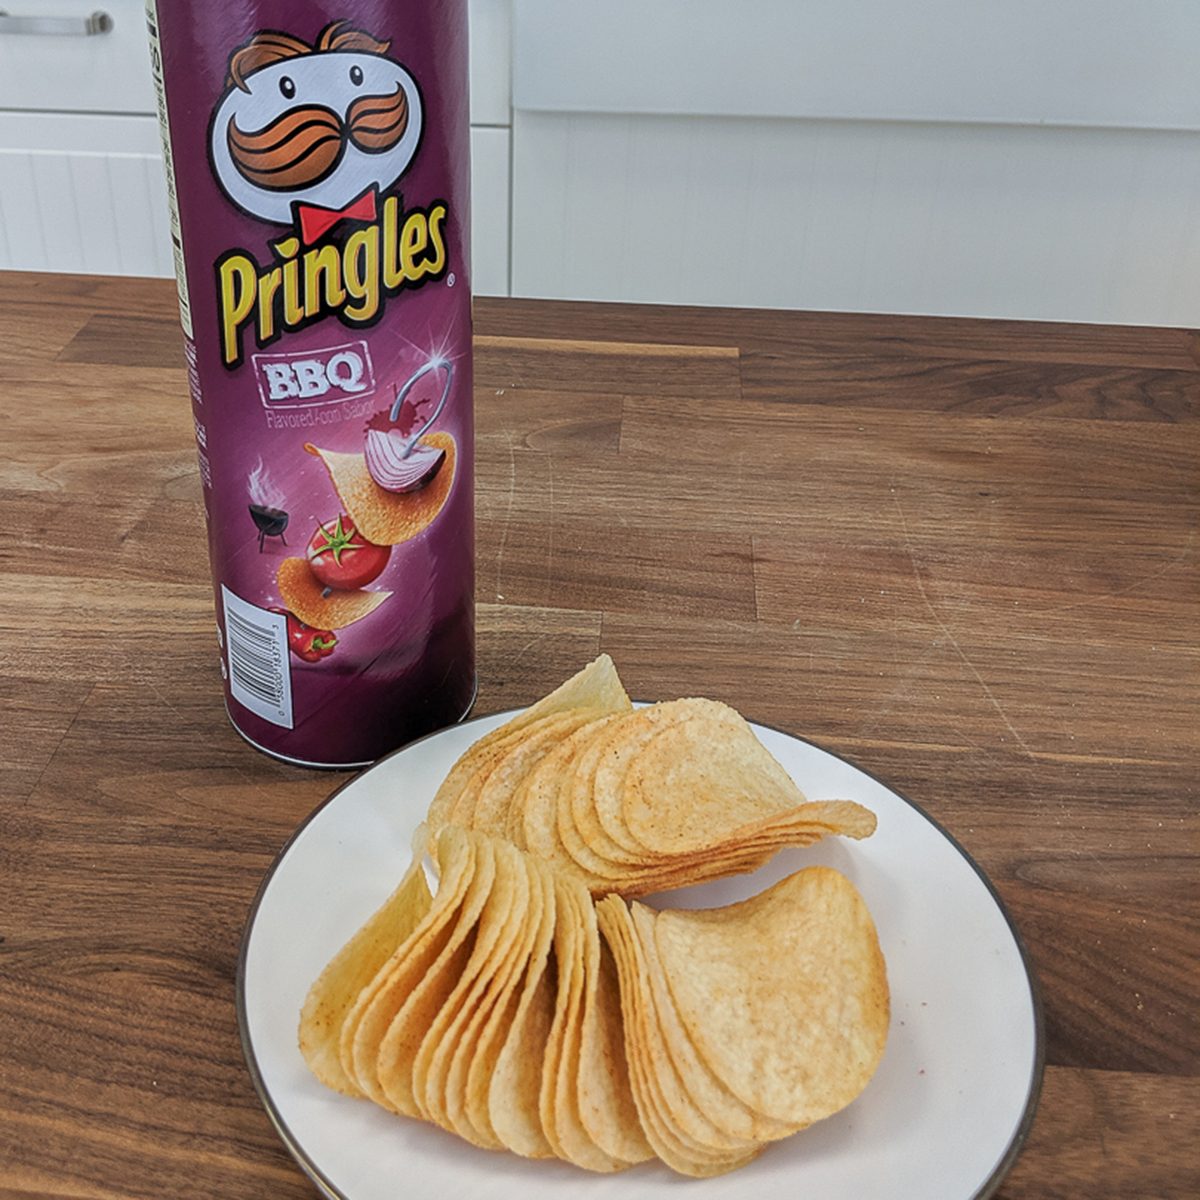 Ranking The Most Popular Pringles Flavors So You Don't Have To